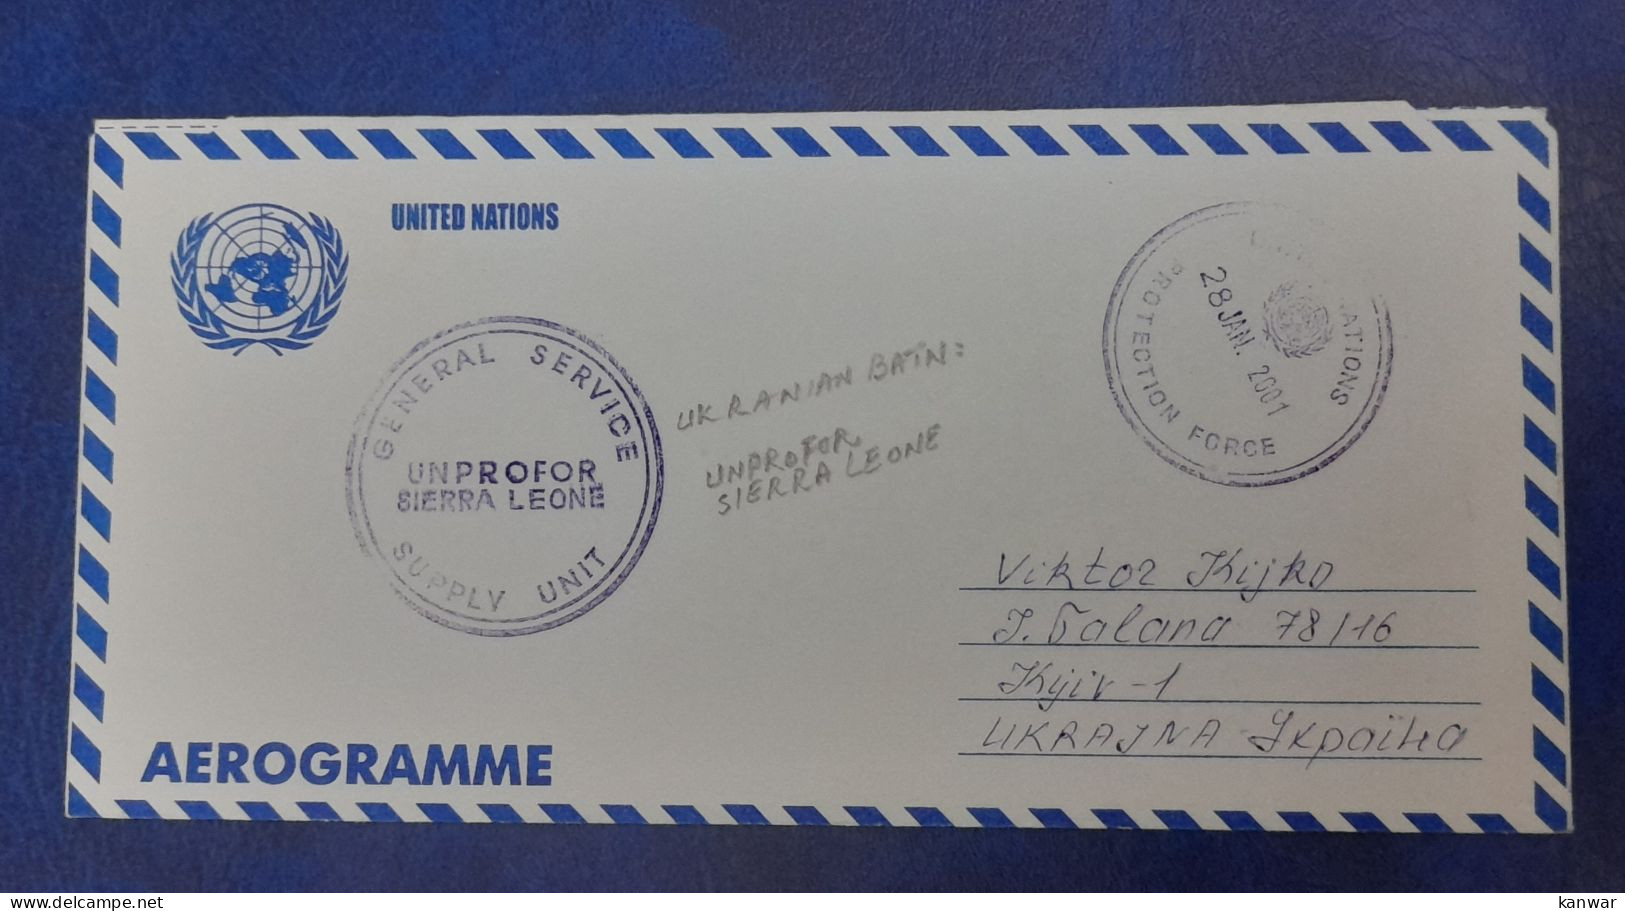 Used Aerogramme Ukranian Batn Unprofor Sierra Leone 2011 Cover Peace Keeping Forces United Nations - Militares